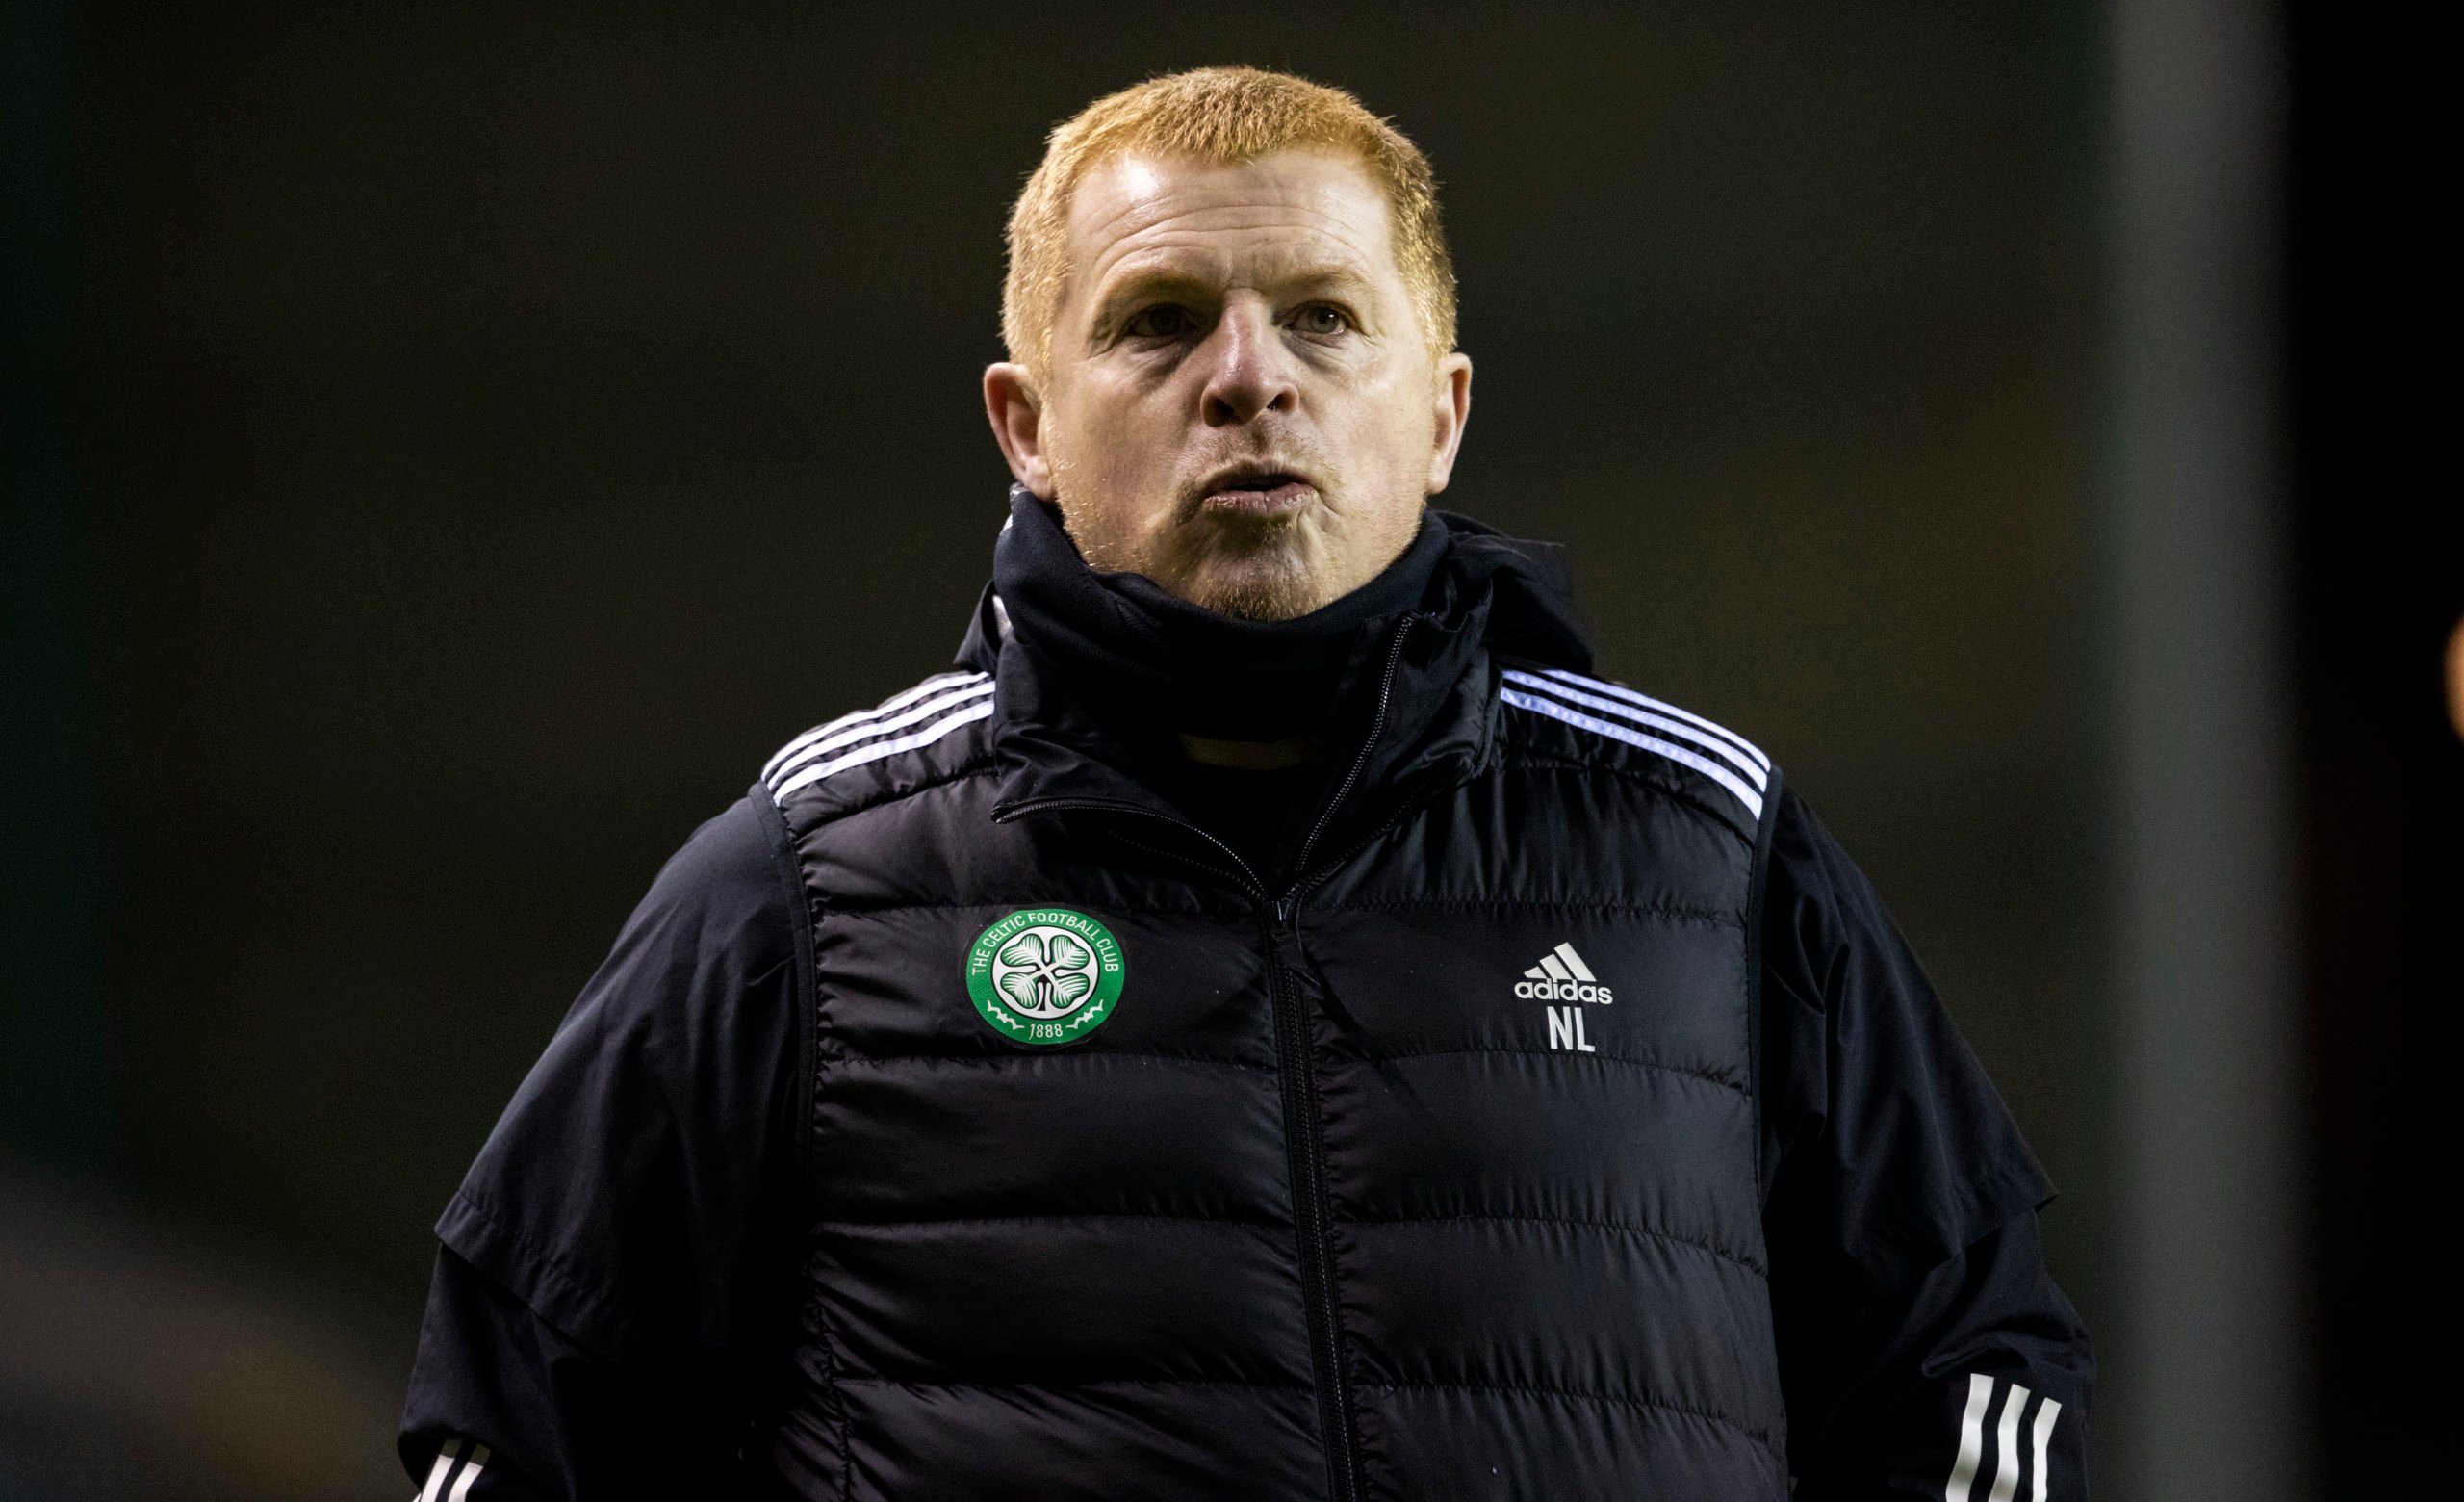 Neil Lennon made an astonishing remark during Celtic press conference yesterday